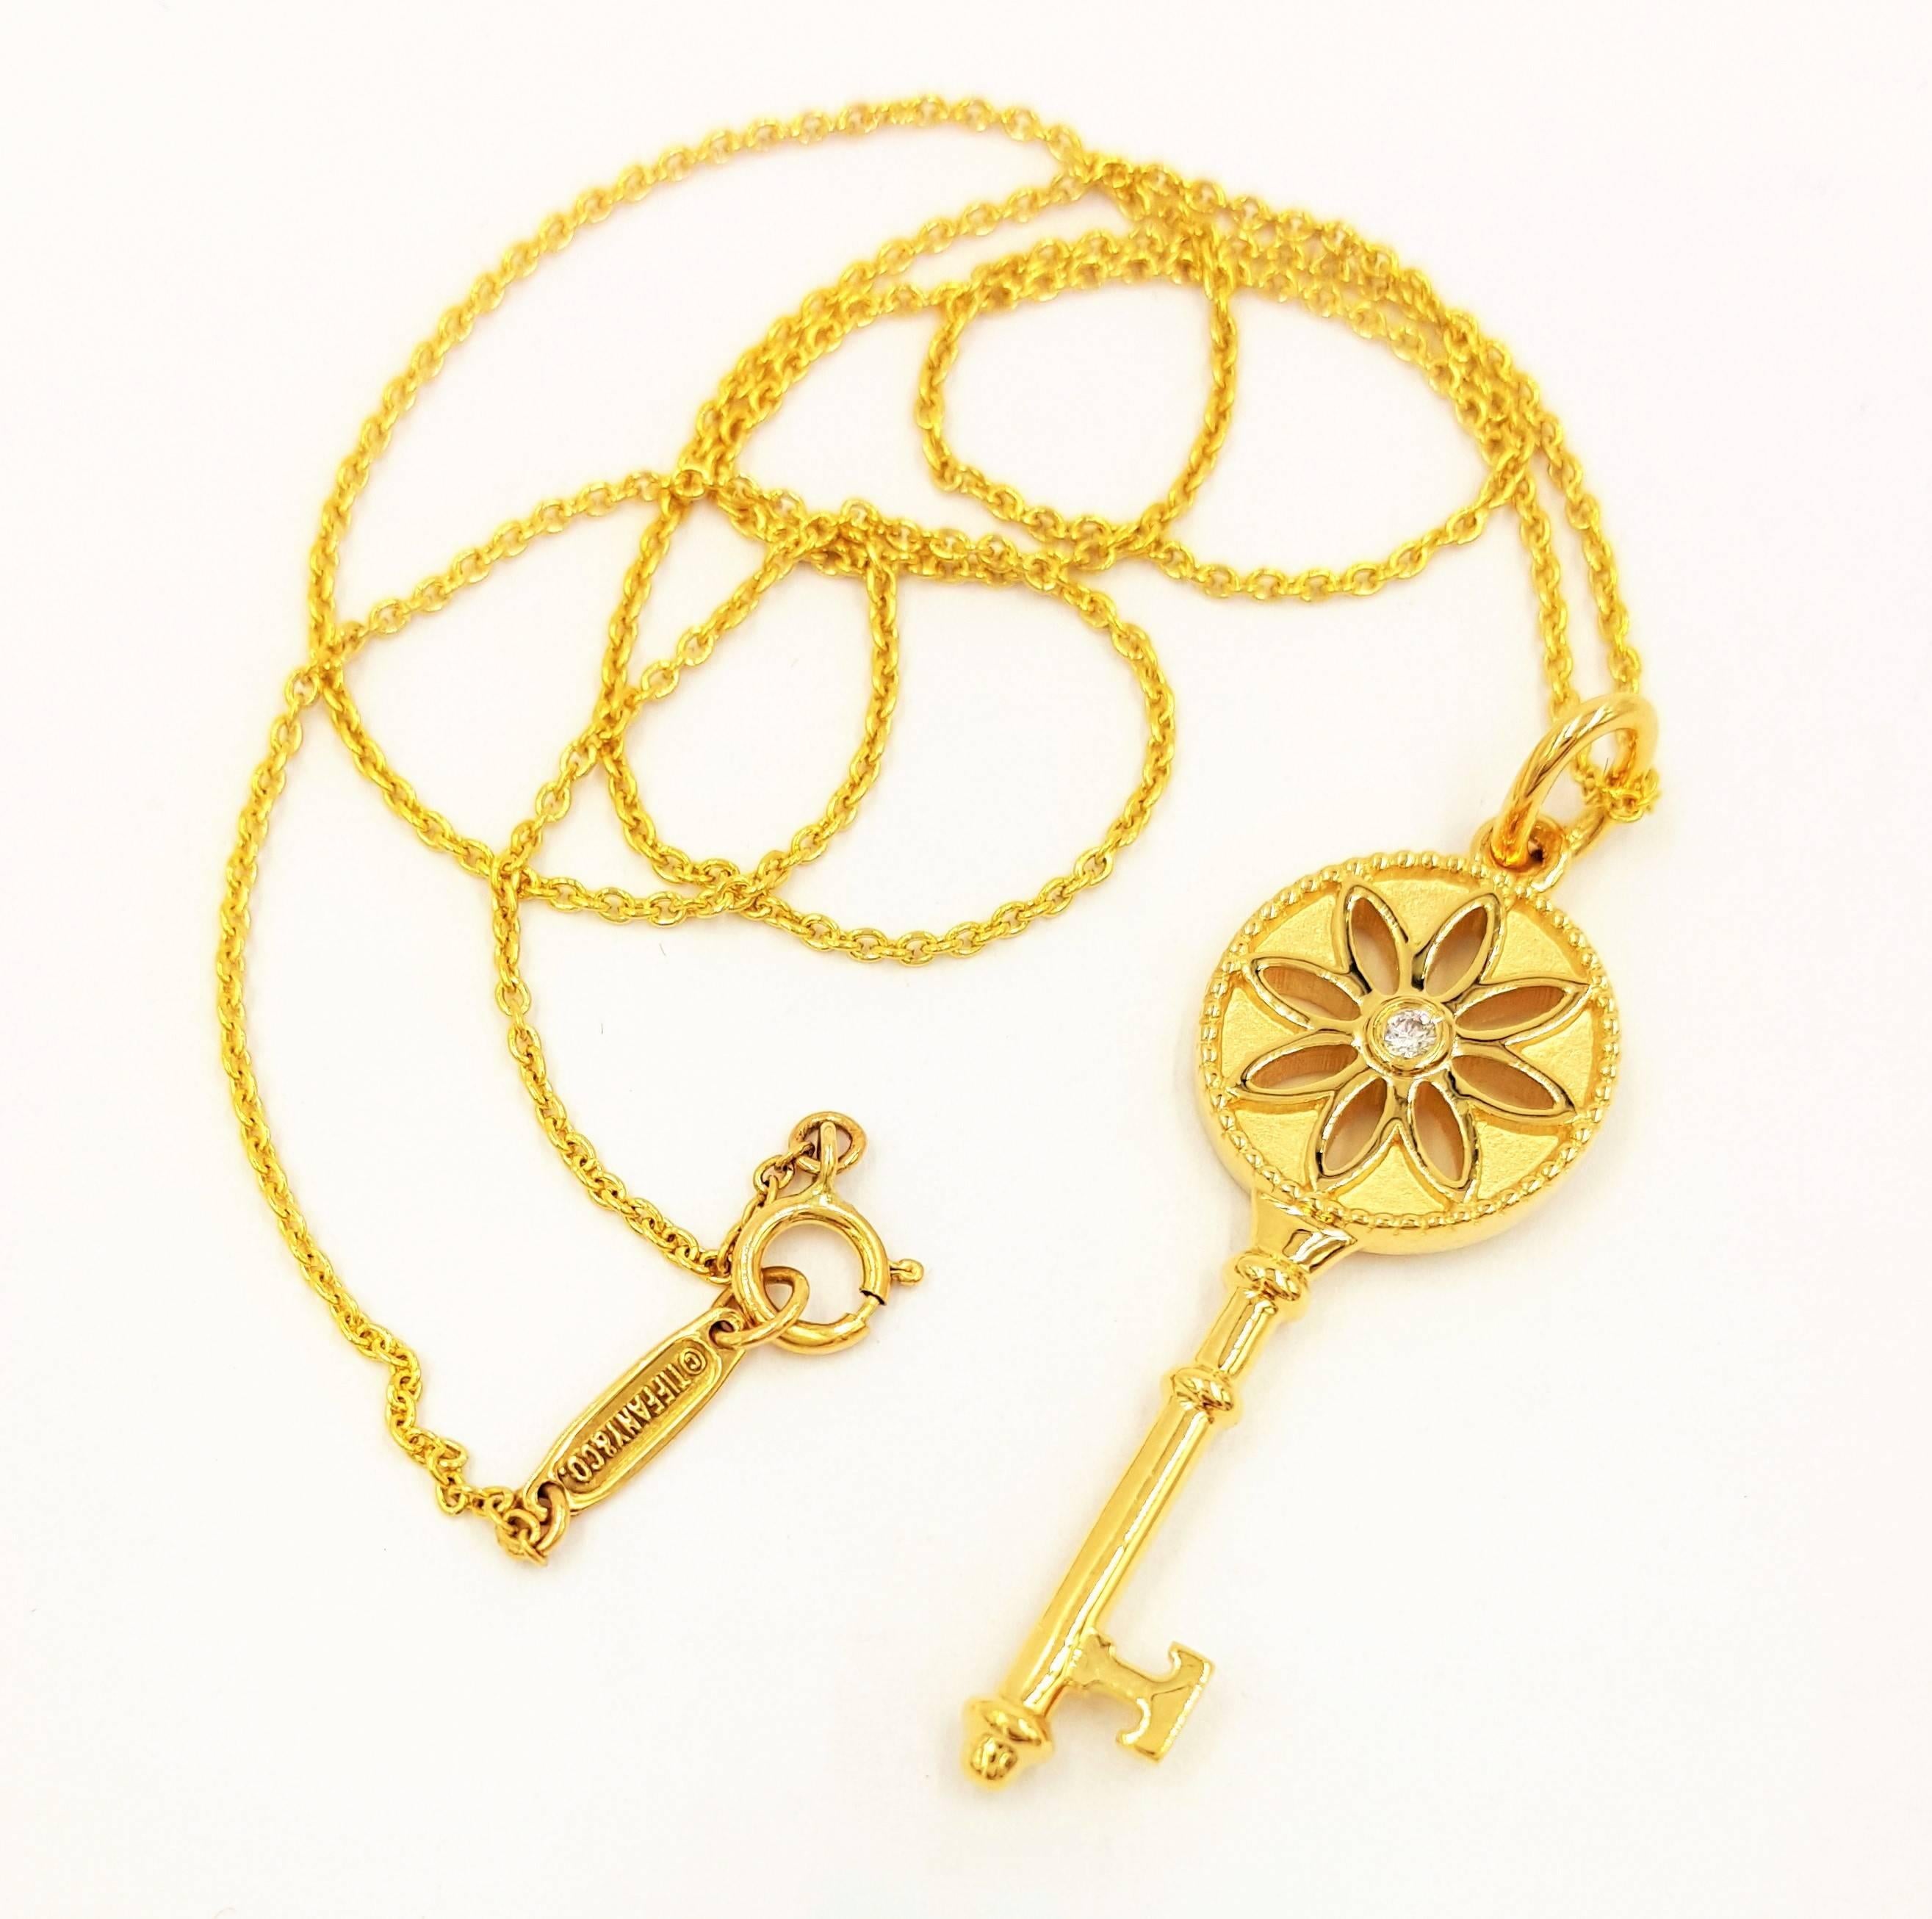 This daisy key comes with the original box and box. 
Tiffany & Co. Keys are Beautifully crafted and carefully designed, 
Tiffany Keys celebrate the wisdom, joy
and optimism of a life well-lived. Icons of
self-expression, the keys embody